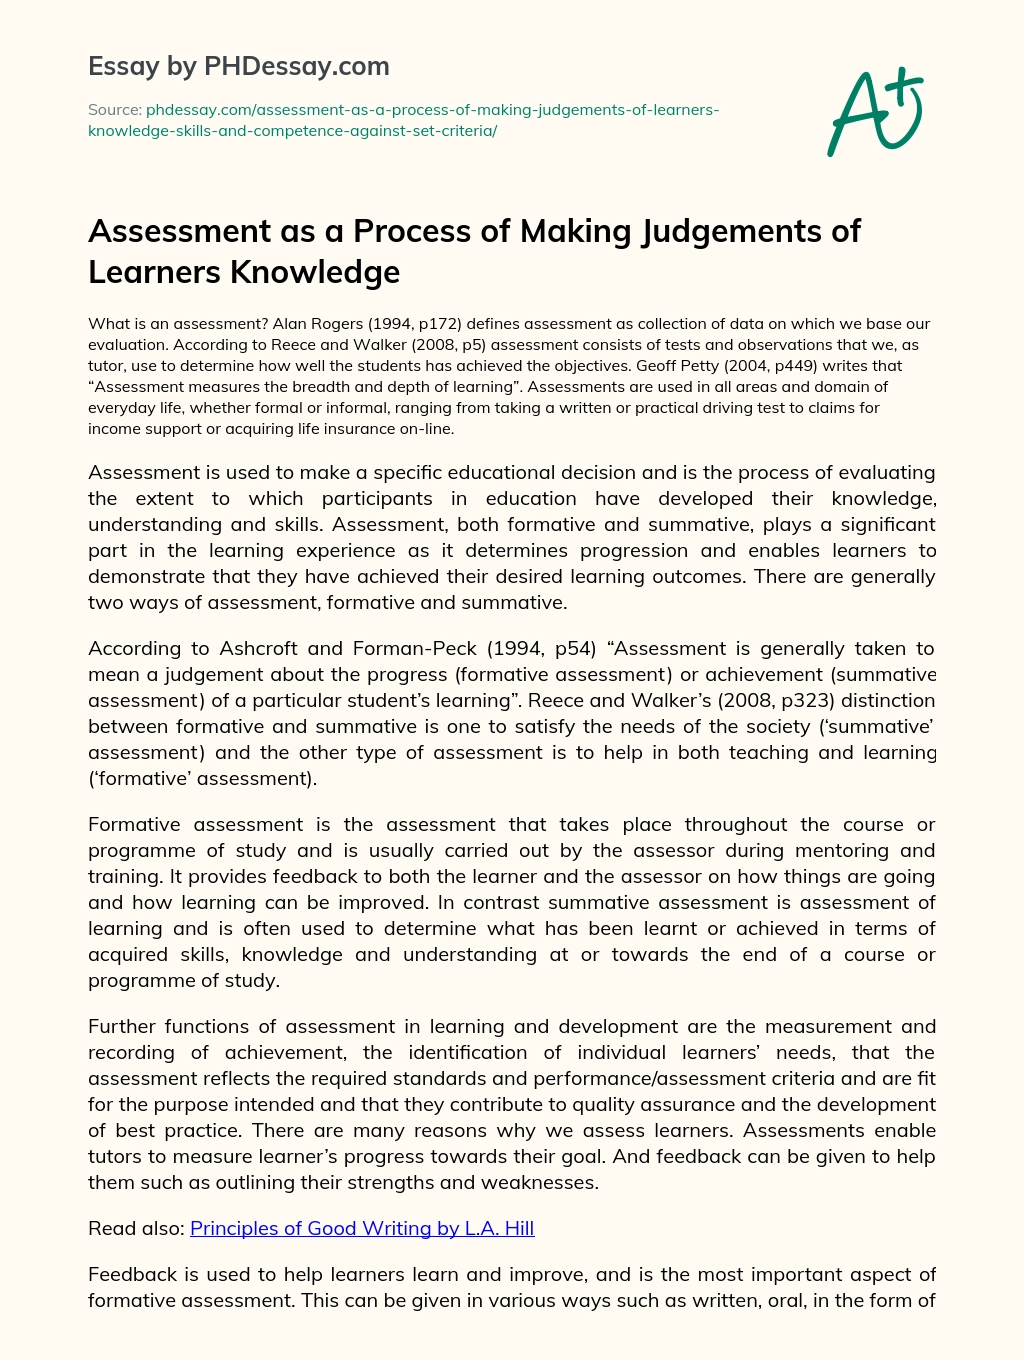 Assessment as a Process of Making Judgements of Learners Knowledge essay